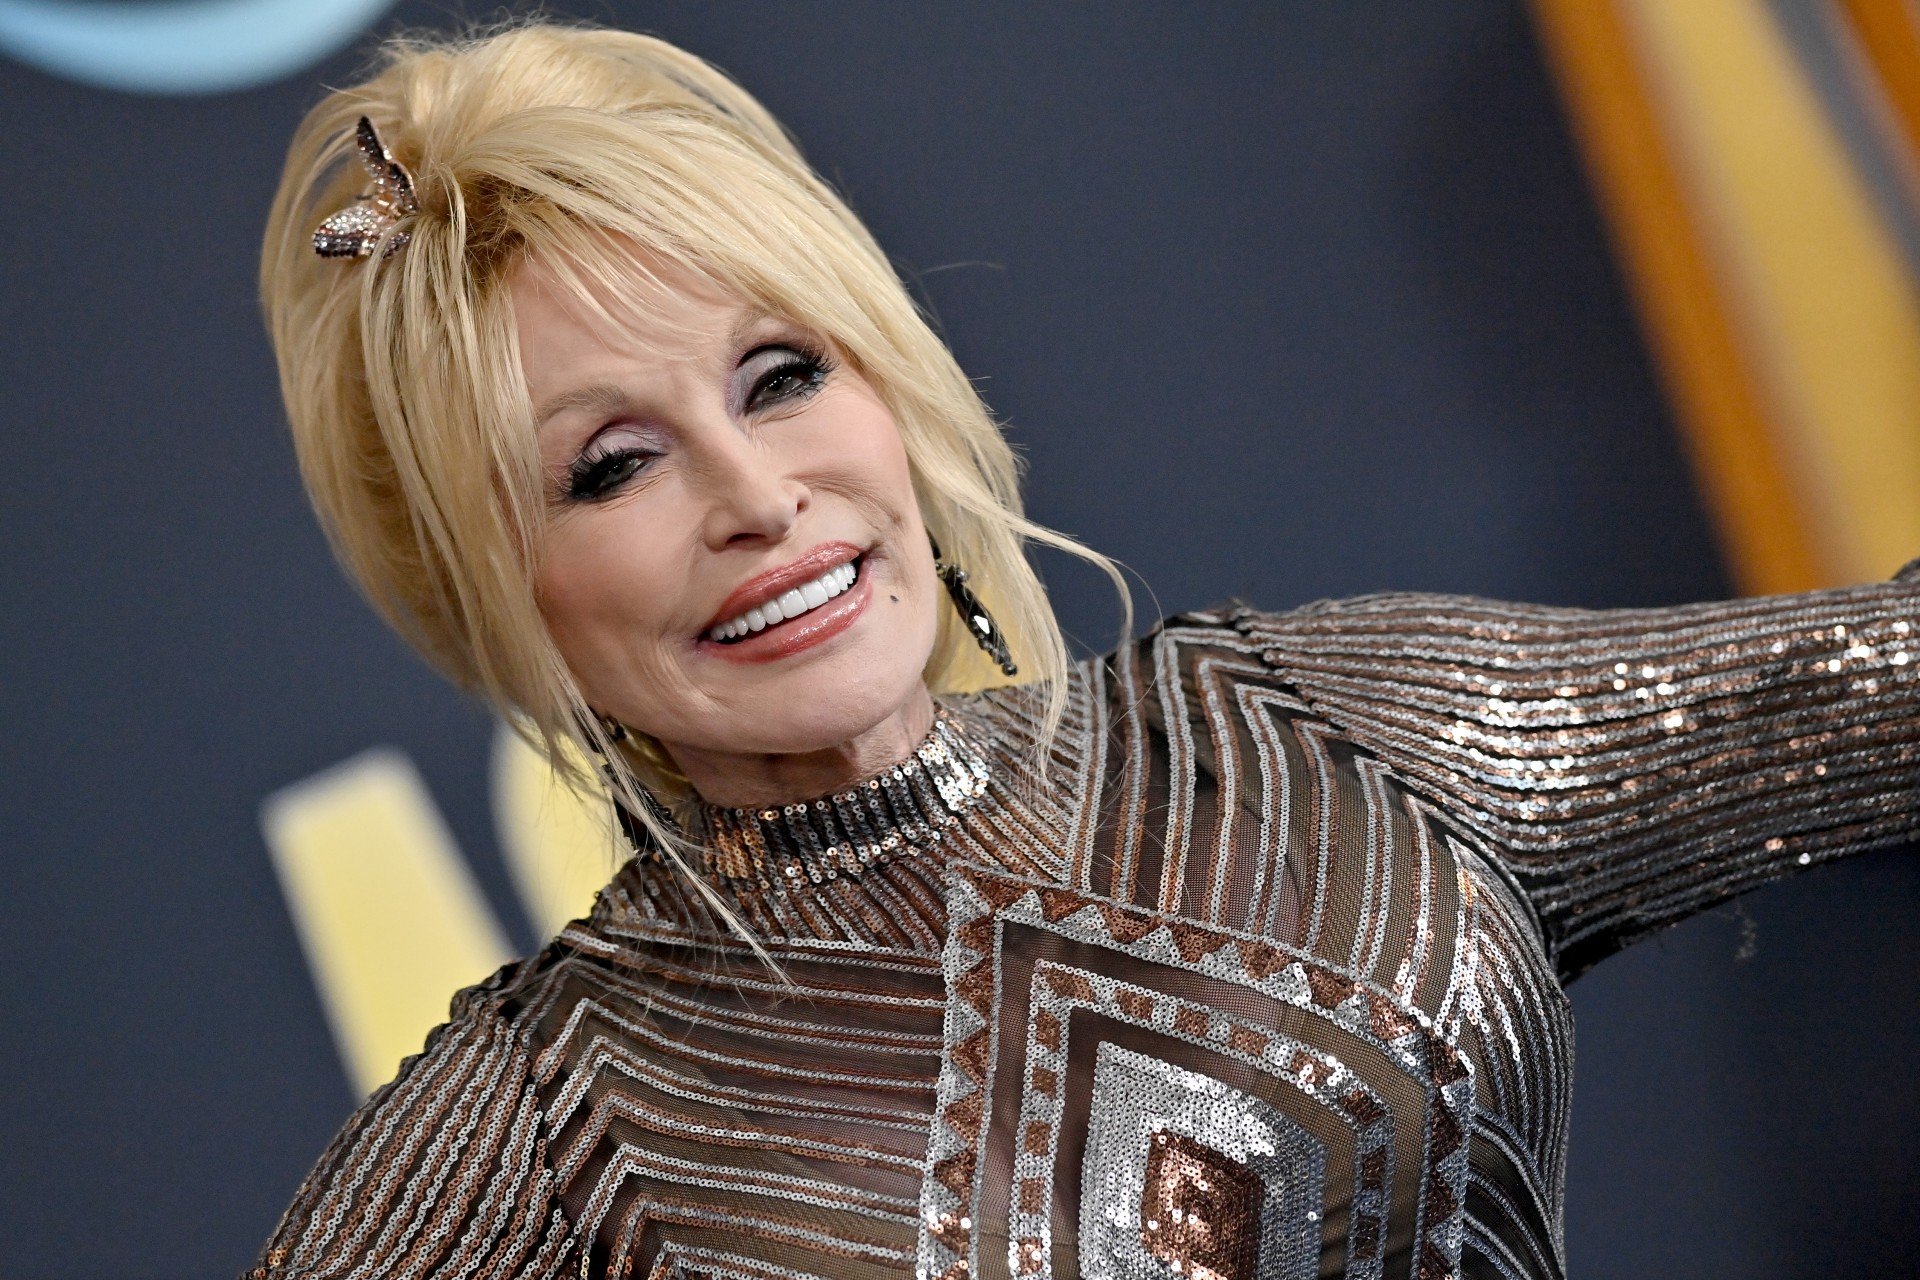 Dolly Parton attends the 2022 ACM Awards and smiles on the red carpet. 